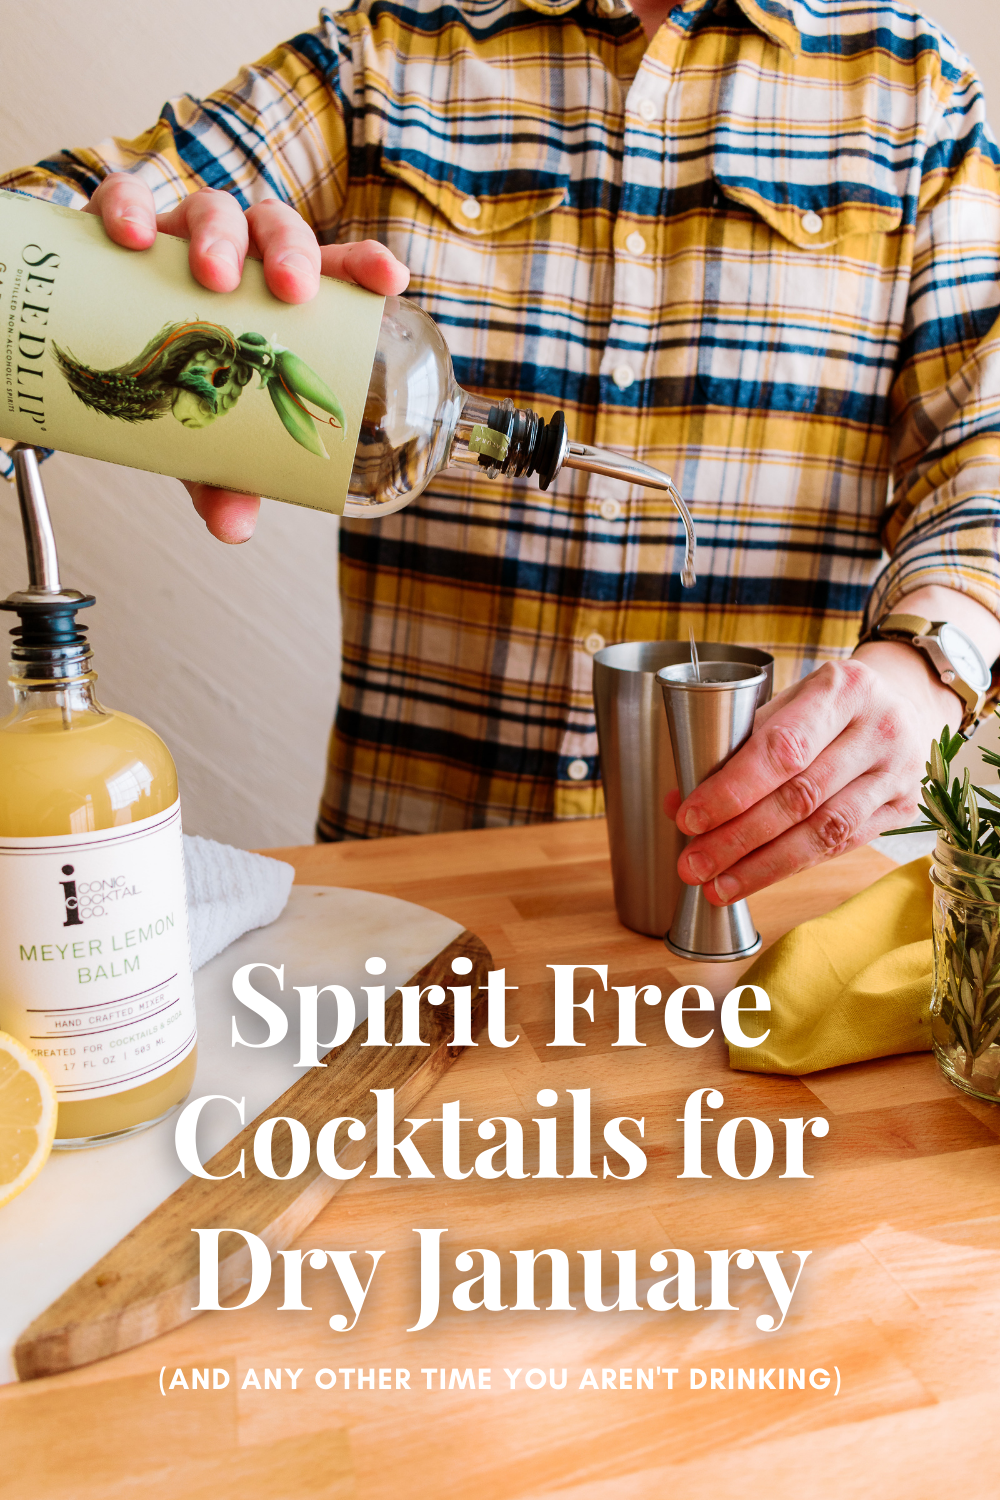 Spirit Free Cocktails for Dry Jan (and any other time you’re not drinking)